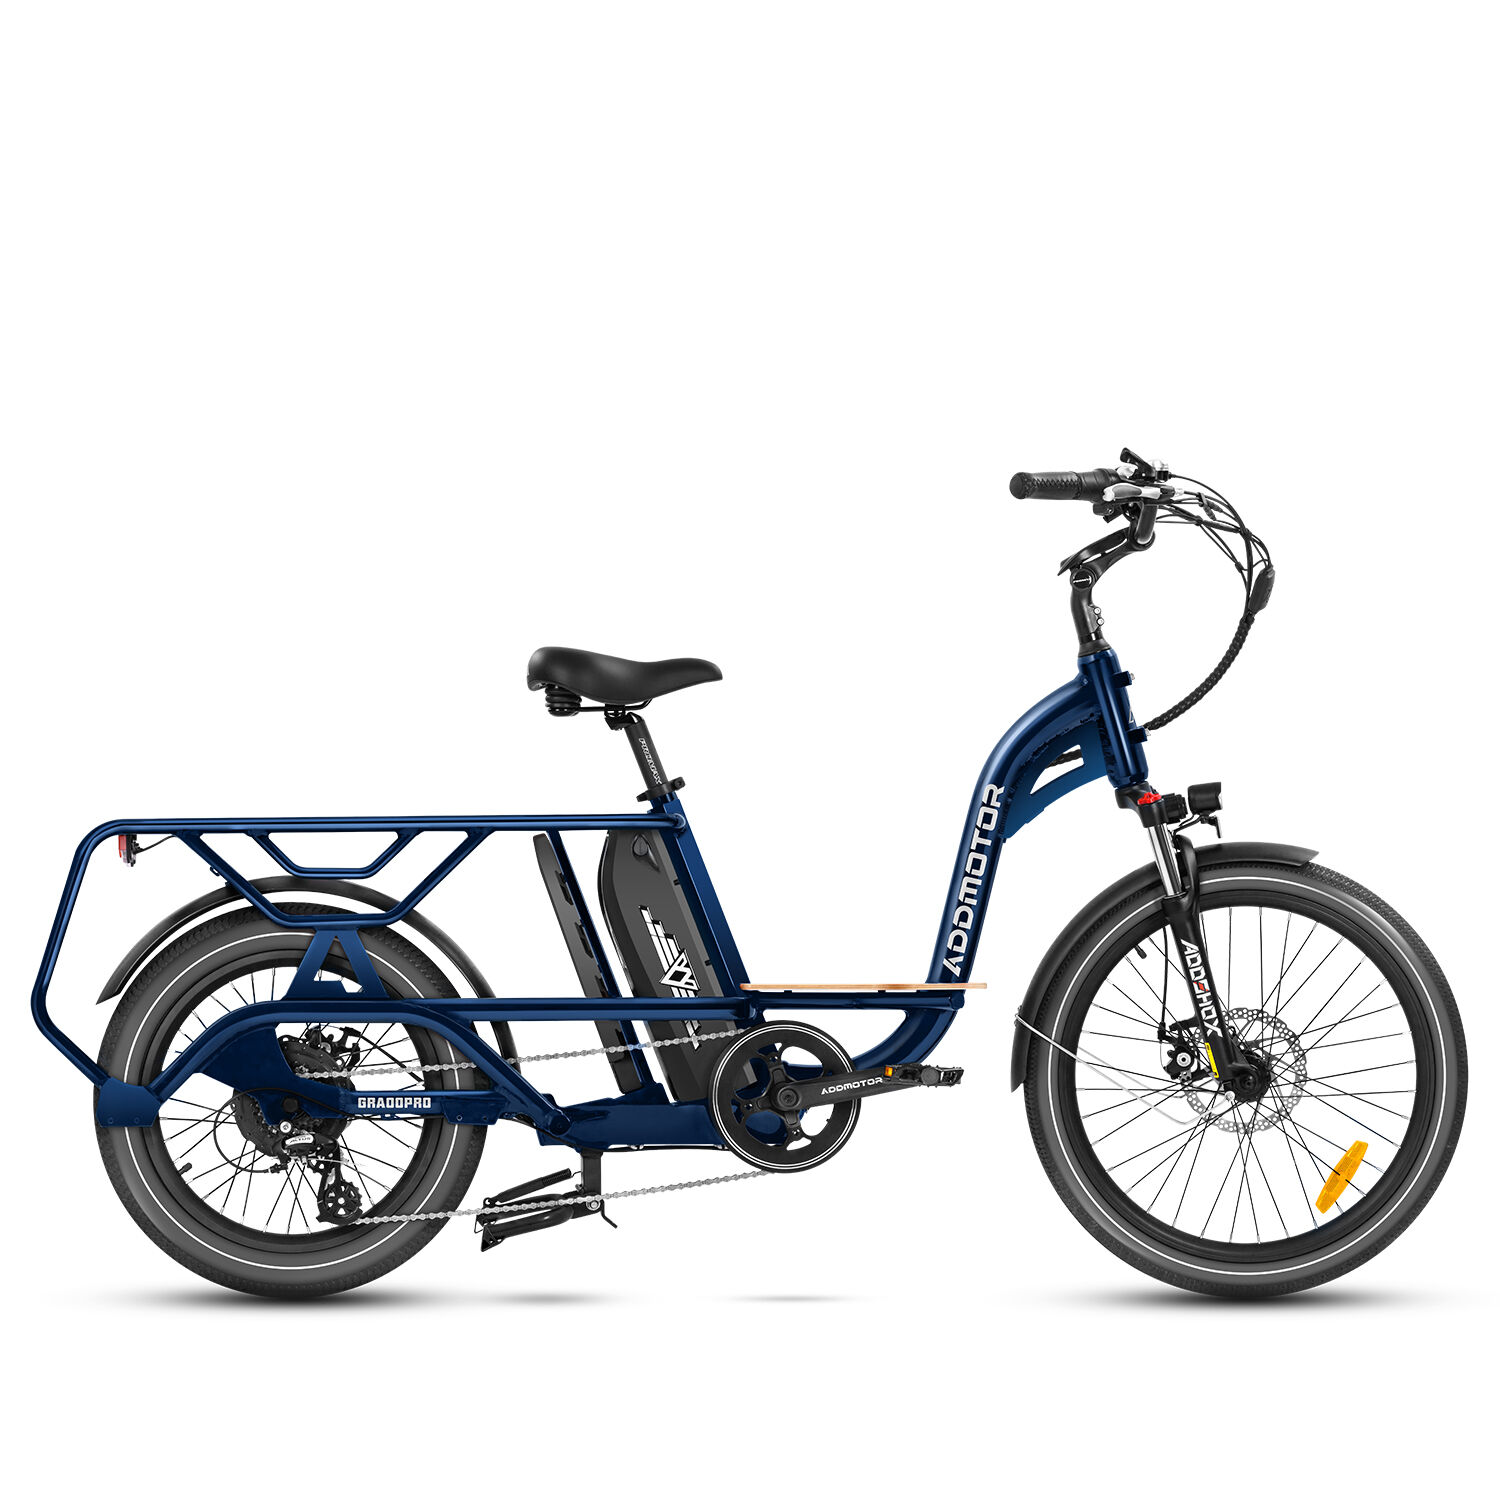 Addmotor Graoopro Electric Bike   Best Dual Battery Cargo Electric Bicycle   Adults 750W Rear Motor Ebikes   Starry Blue + Dual-Battery